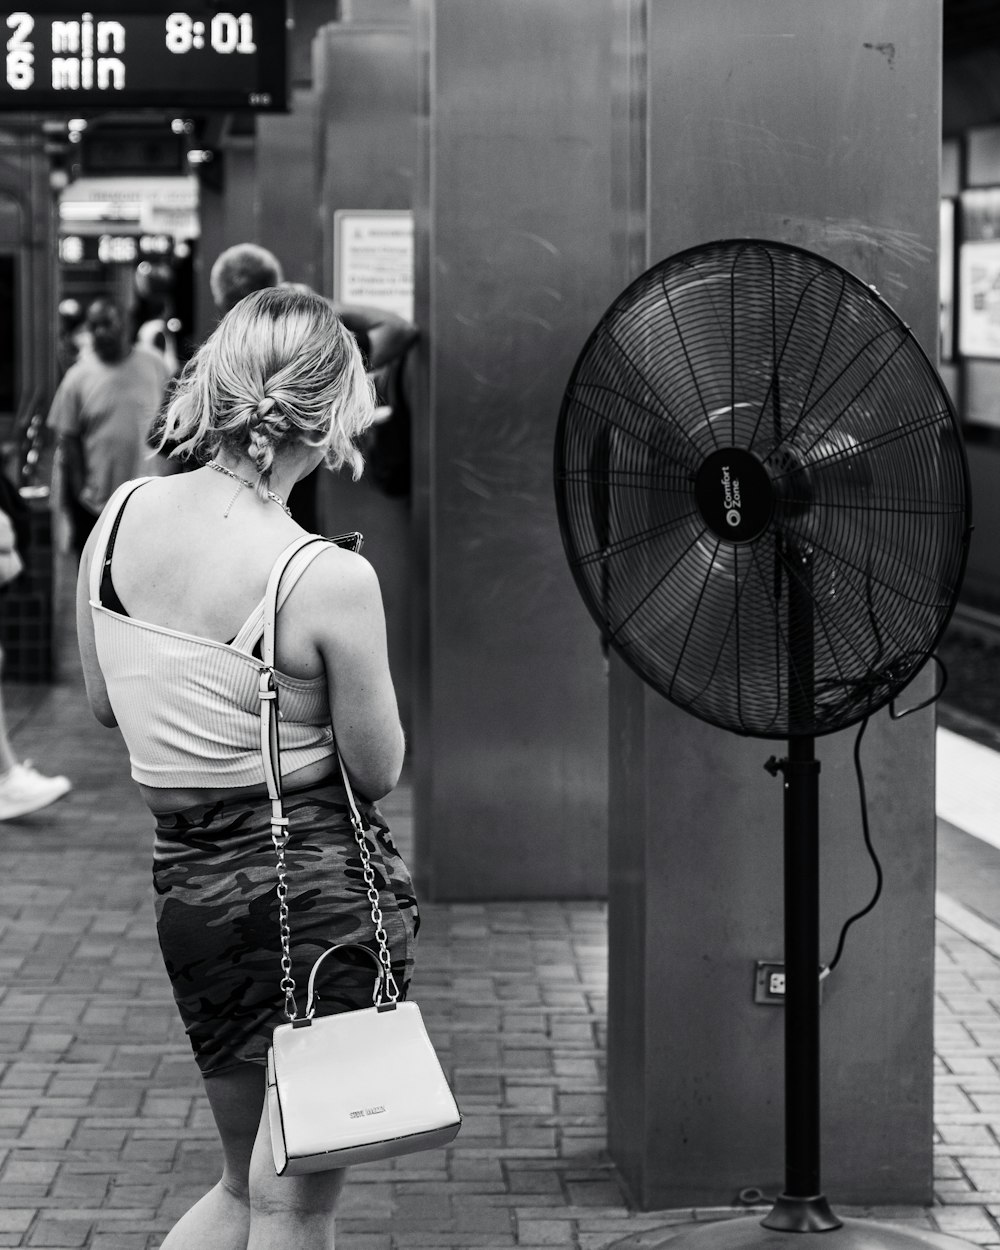 a woman in a short skirt is standing next to a fan